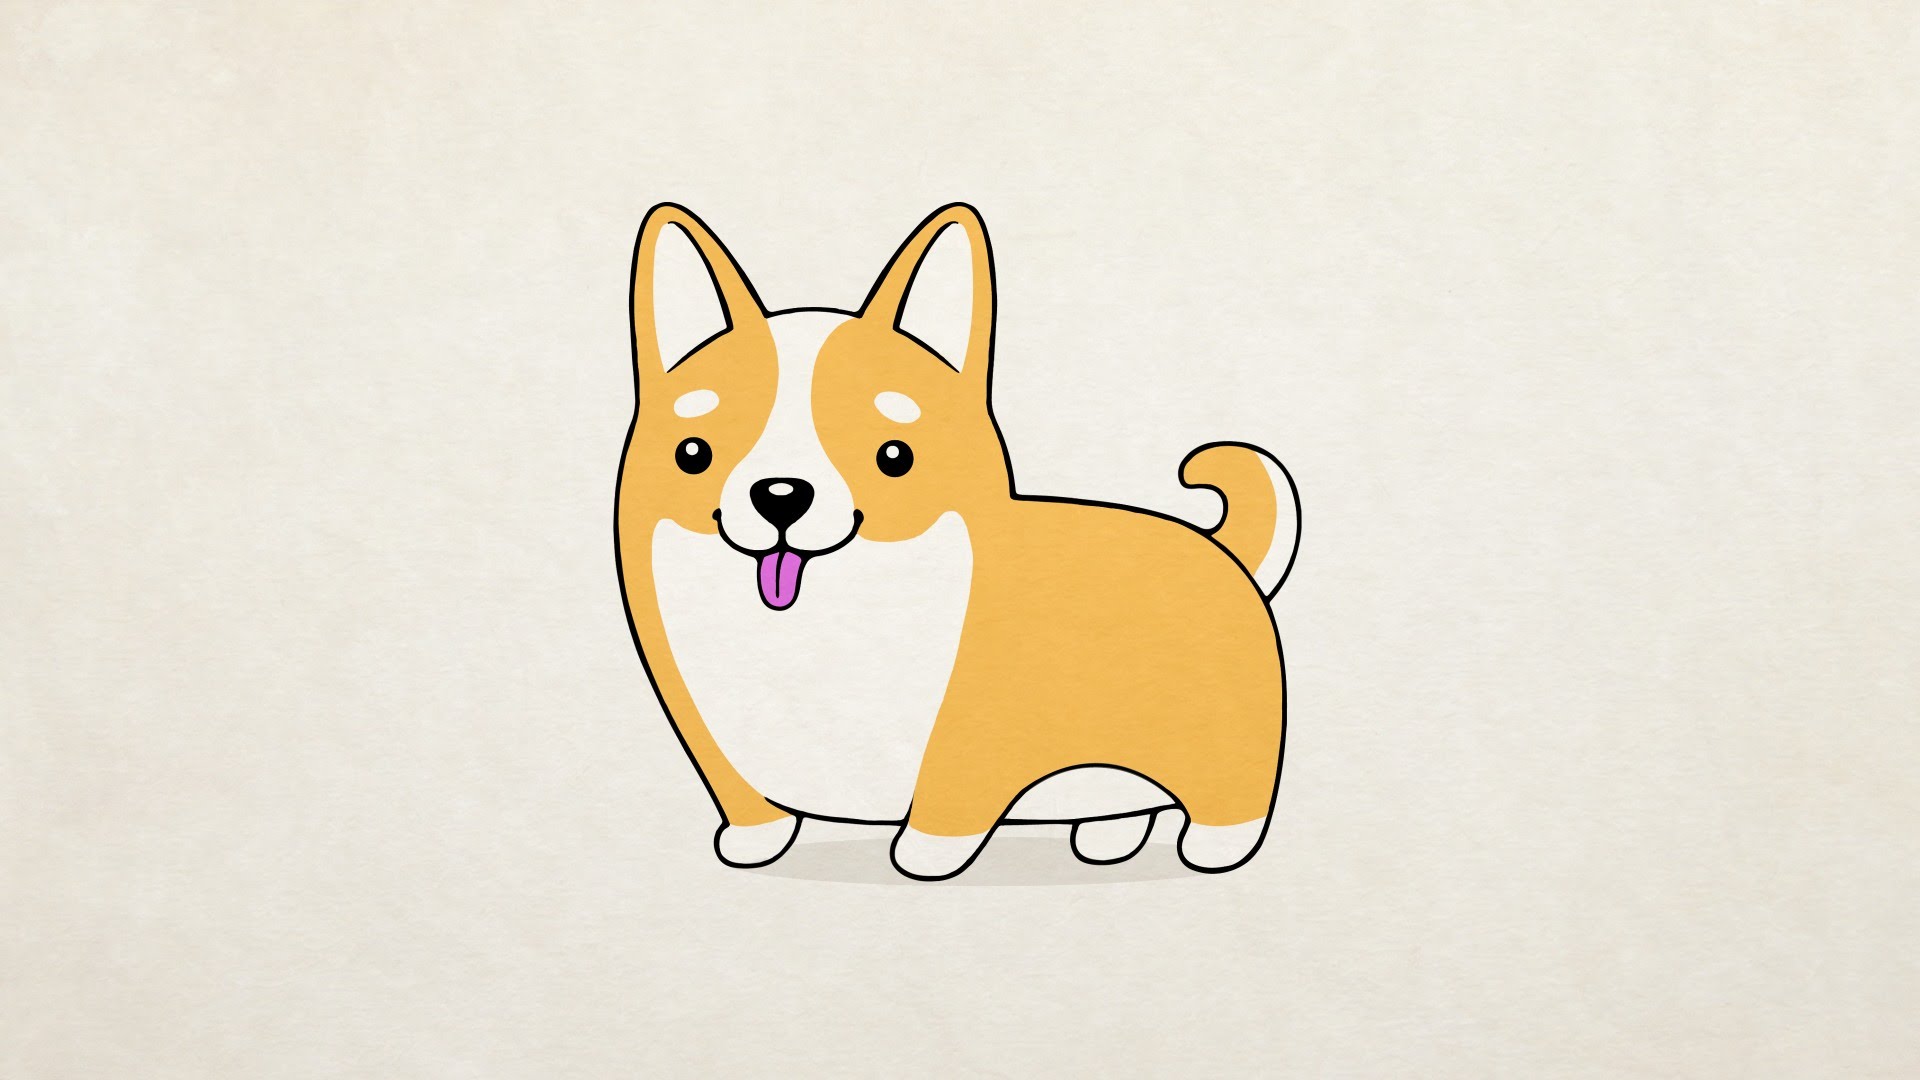 Easy How To Draw A Cute Puppy ~ How To Draw And Color A Cute Puppy ...